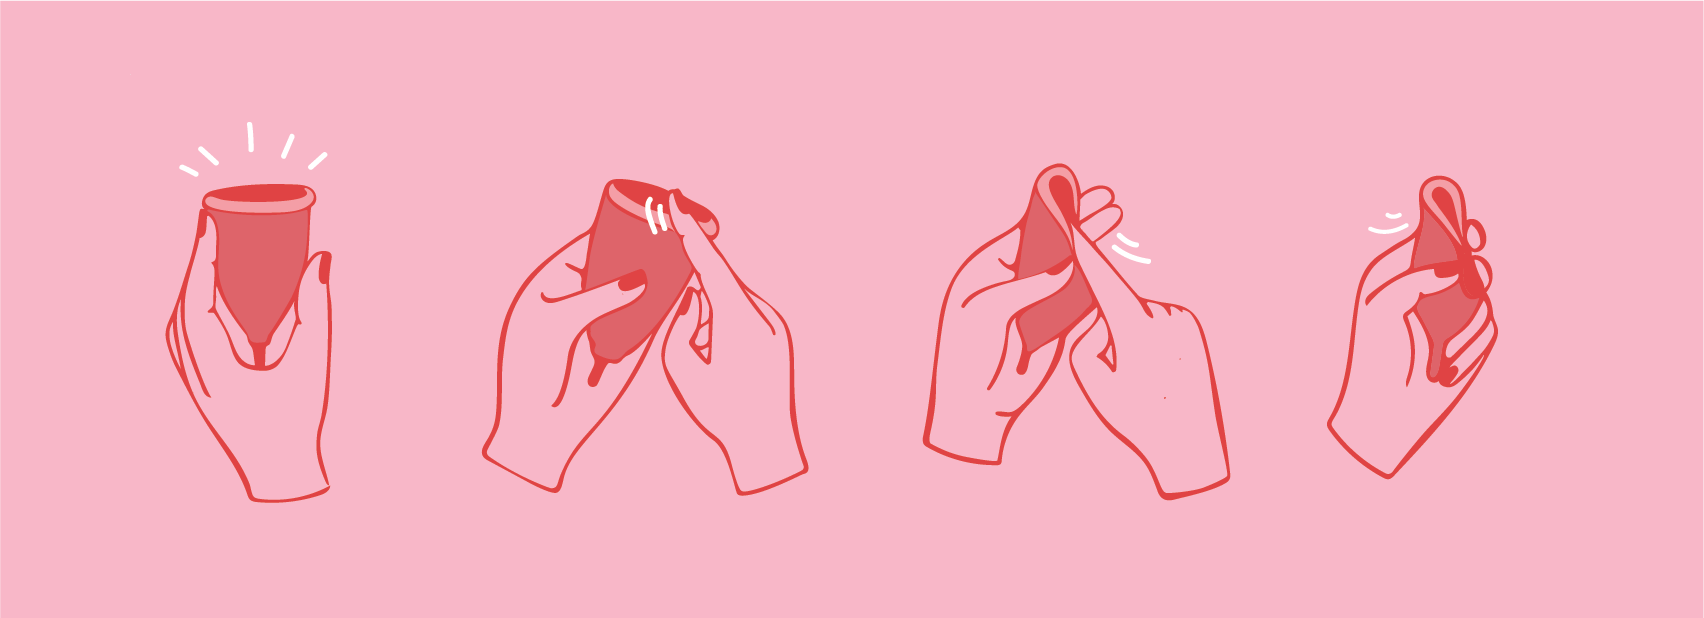 Your Menstrual Cup Keeps Sliding Down? Here's What to Do